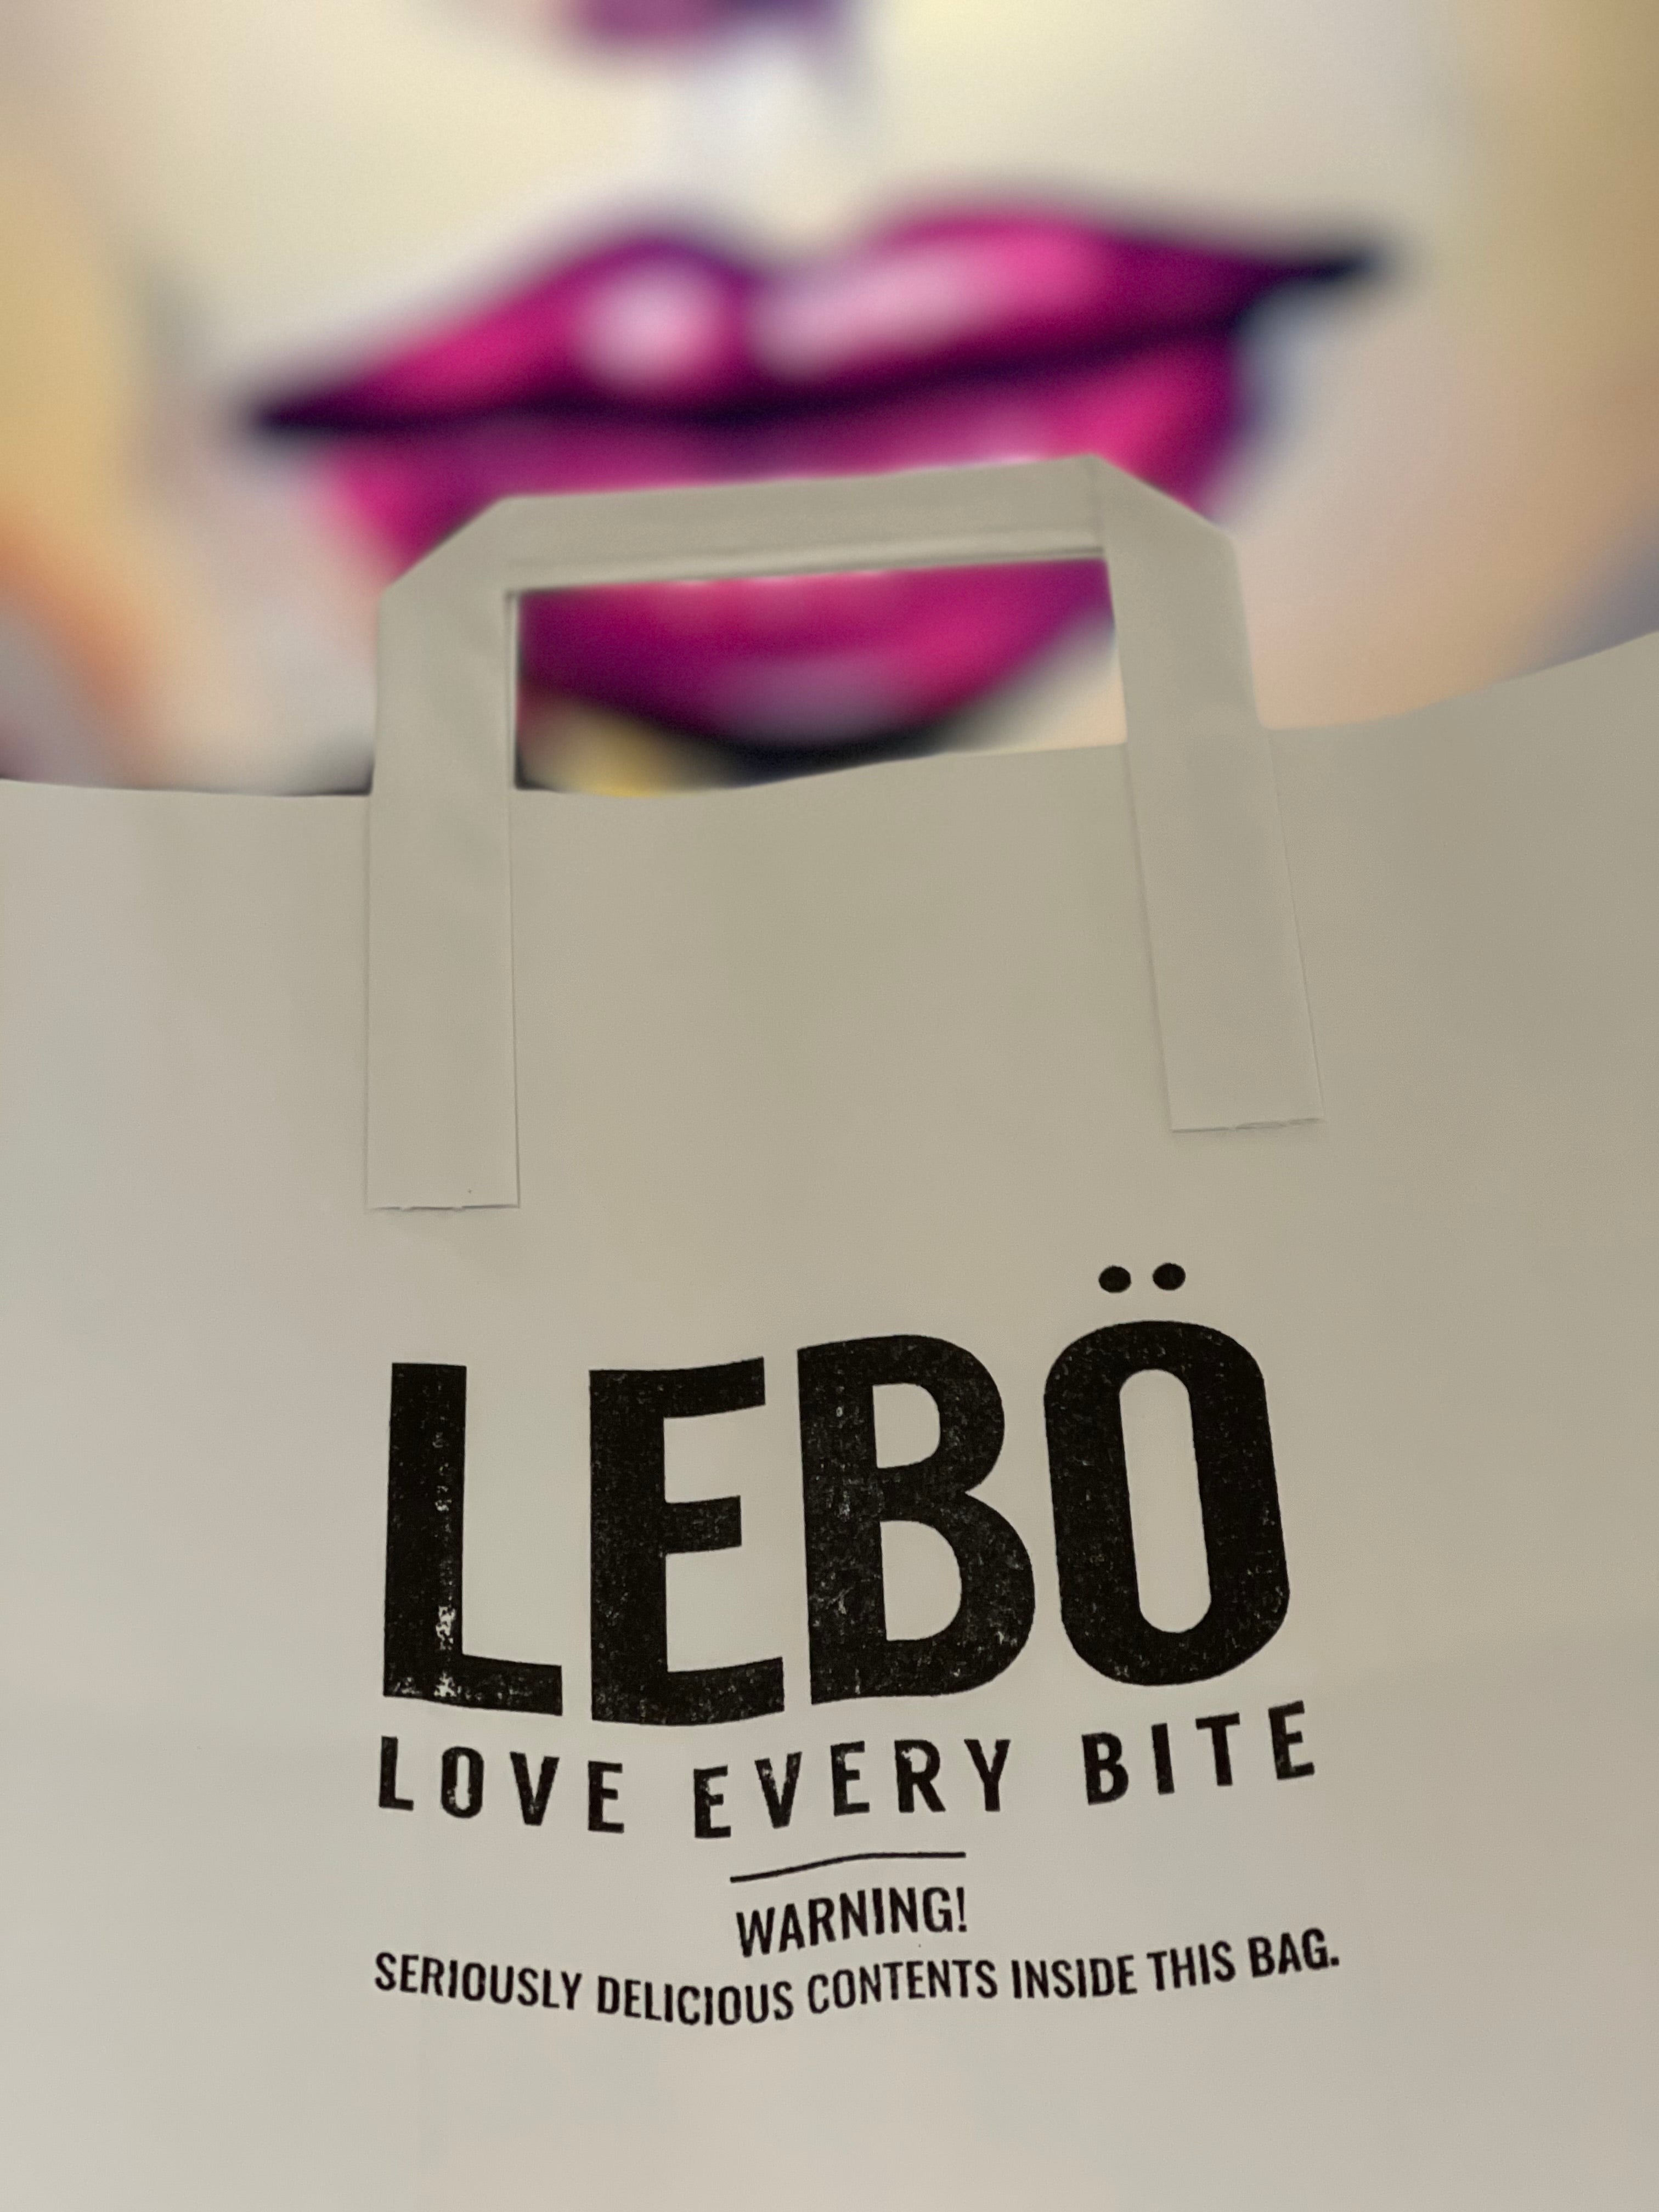 EAT Lebo takeaway bag in front of one of the walls with an image of pink lips.